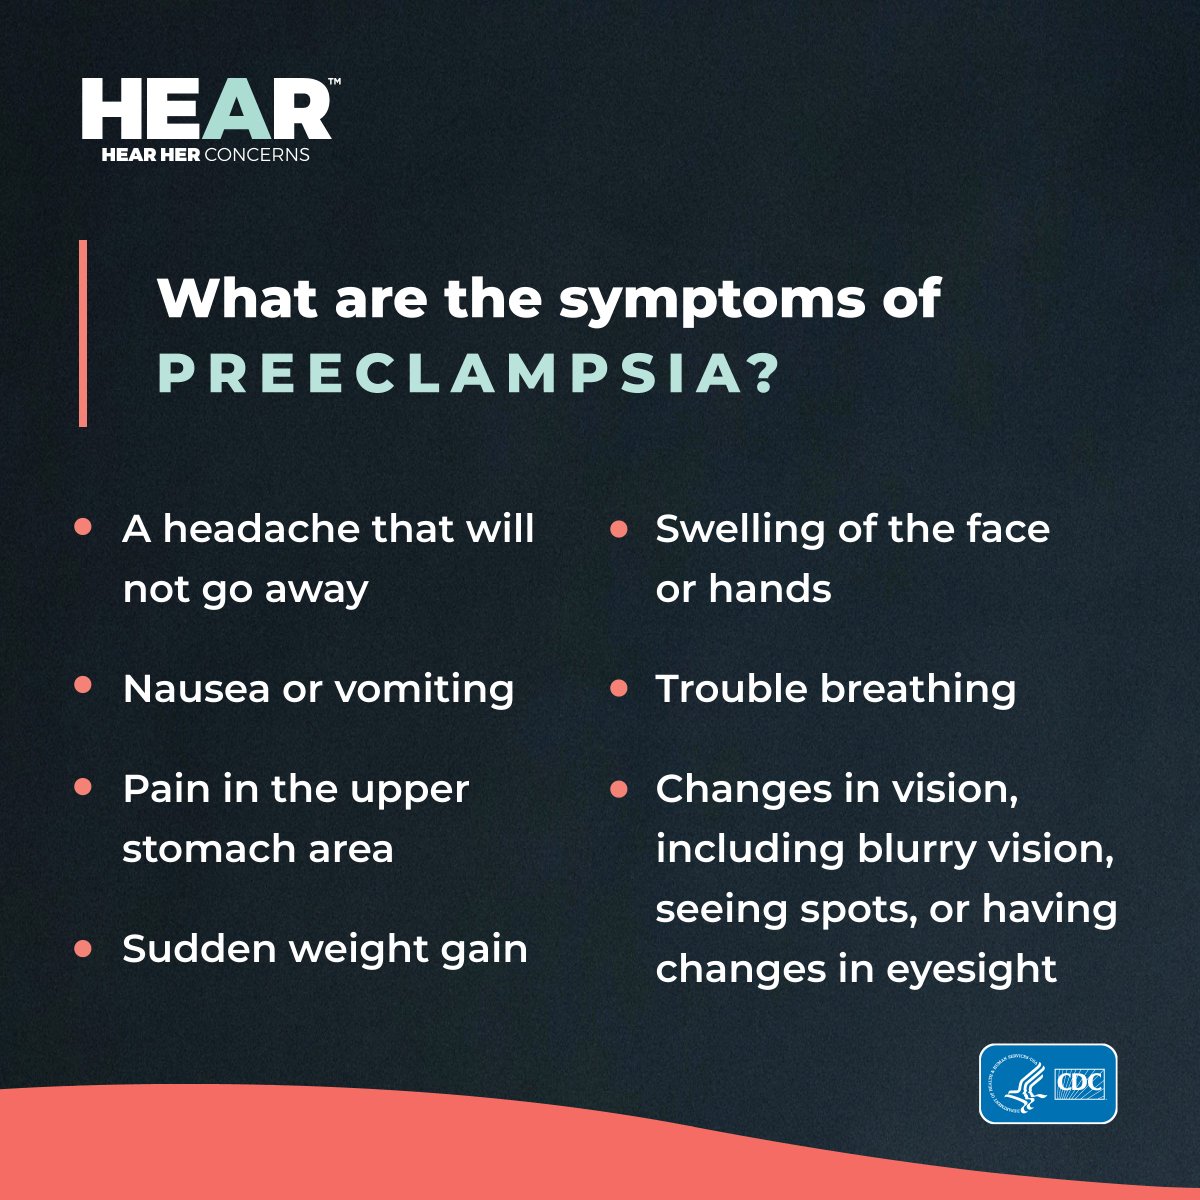 #DYK that preeclampsia, a pregnancy-related complication that is characterized by high blood pressure, happens in about 1 in 25 pregnancies in the U.S.? Learn more about signs to look for during and after pregnancy: bit.ly/3y1J1XQ #PreeclampsiaAwarenessMonth #HearHer